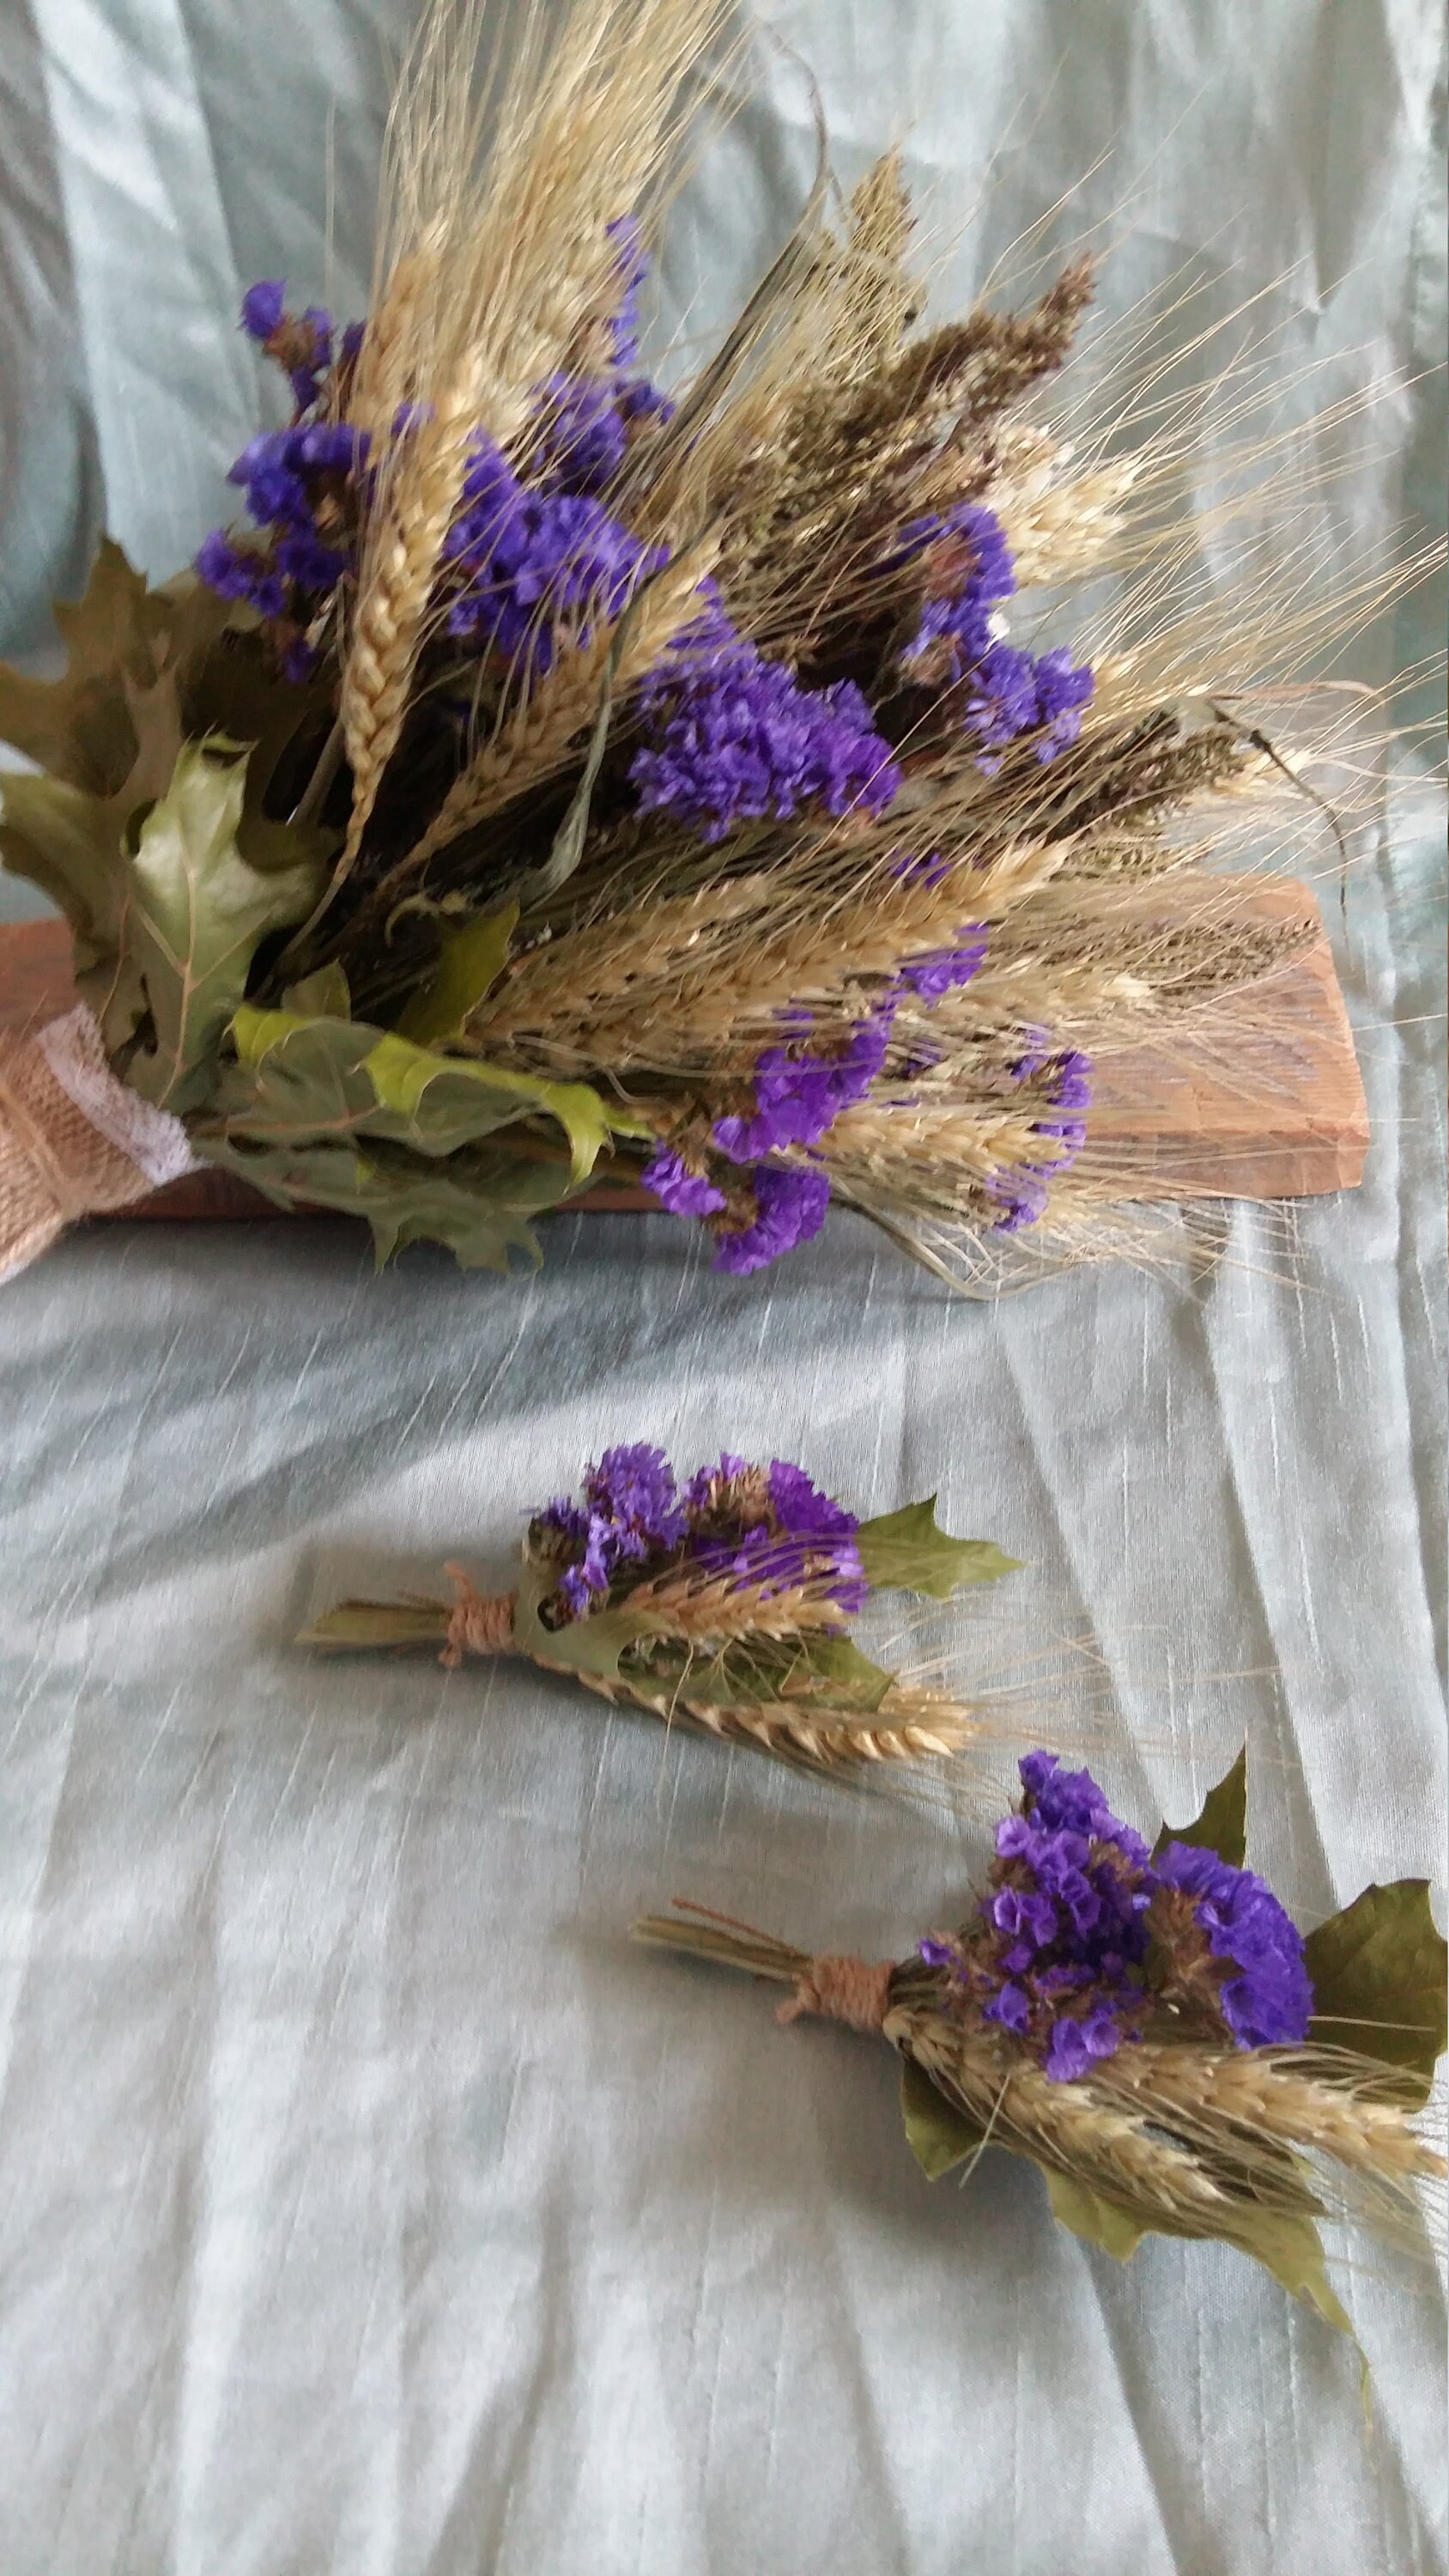 100 STEMS DRIED WHEAT/RYE FOR FLOWERS ARRANGING READY TO USE NATURAL BOUQUET 20" 